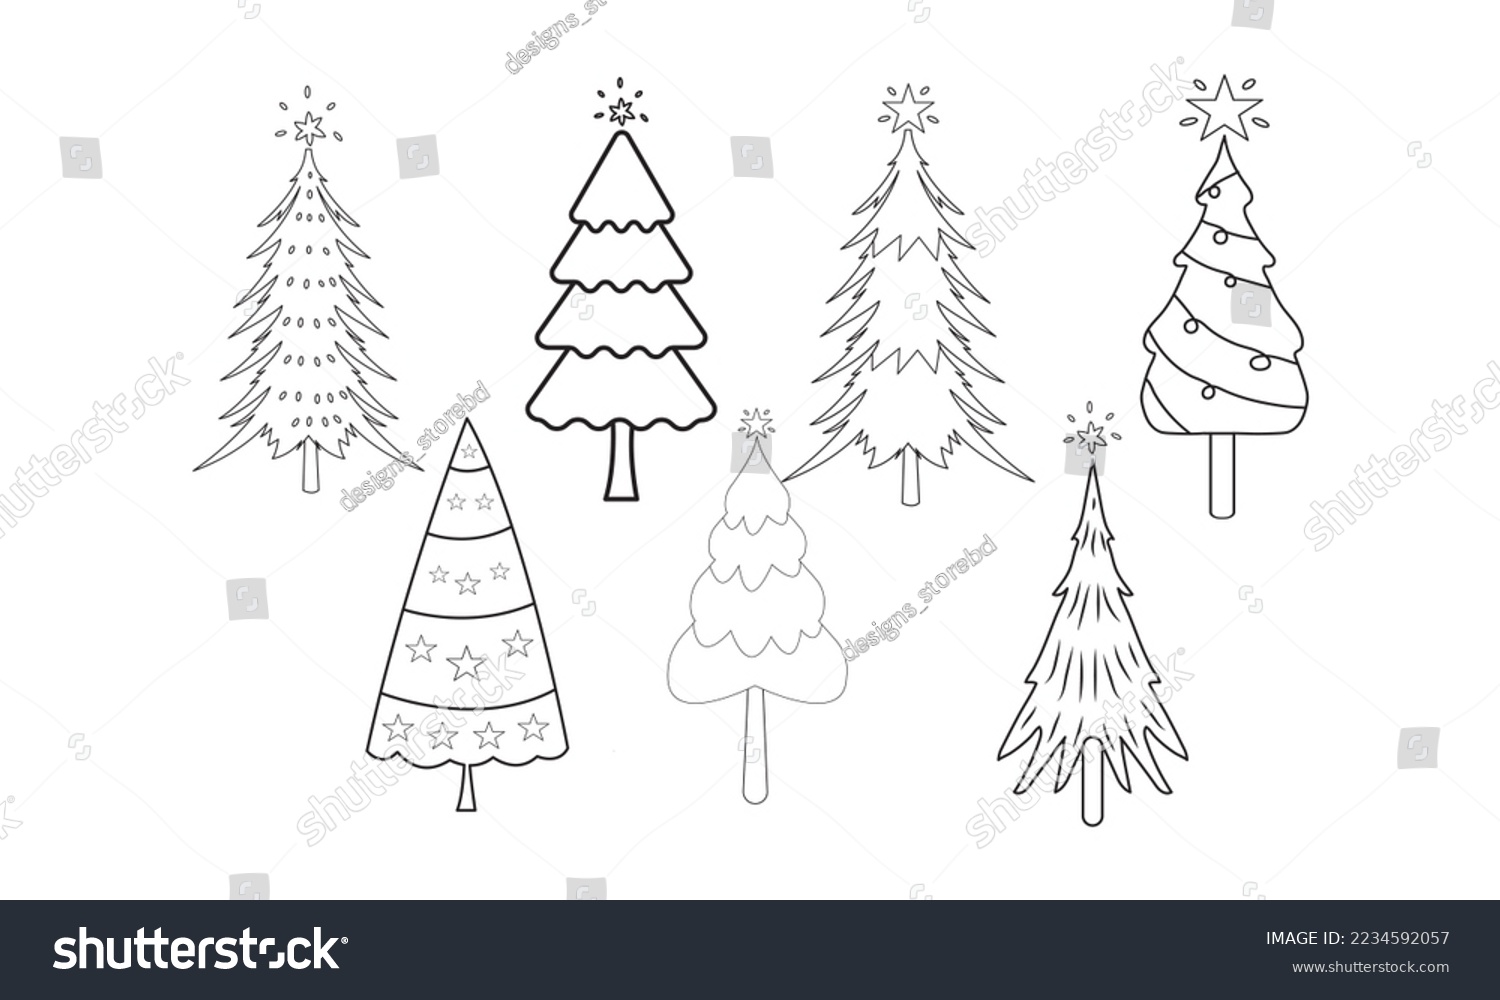 SVG of Christmas vector, Christmas tree hand drawn illustration, Pine tree silhouettes Evergreen forest firs and spruces black shapes, wild nature trees templates. Vector illustration woodland trees set svg